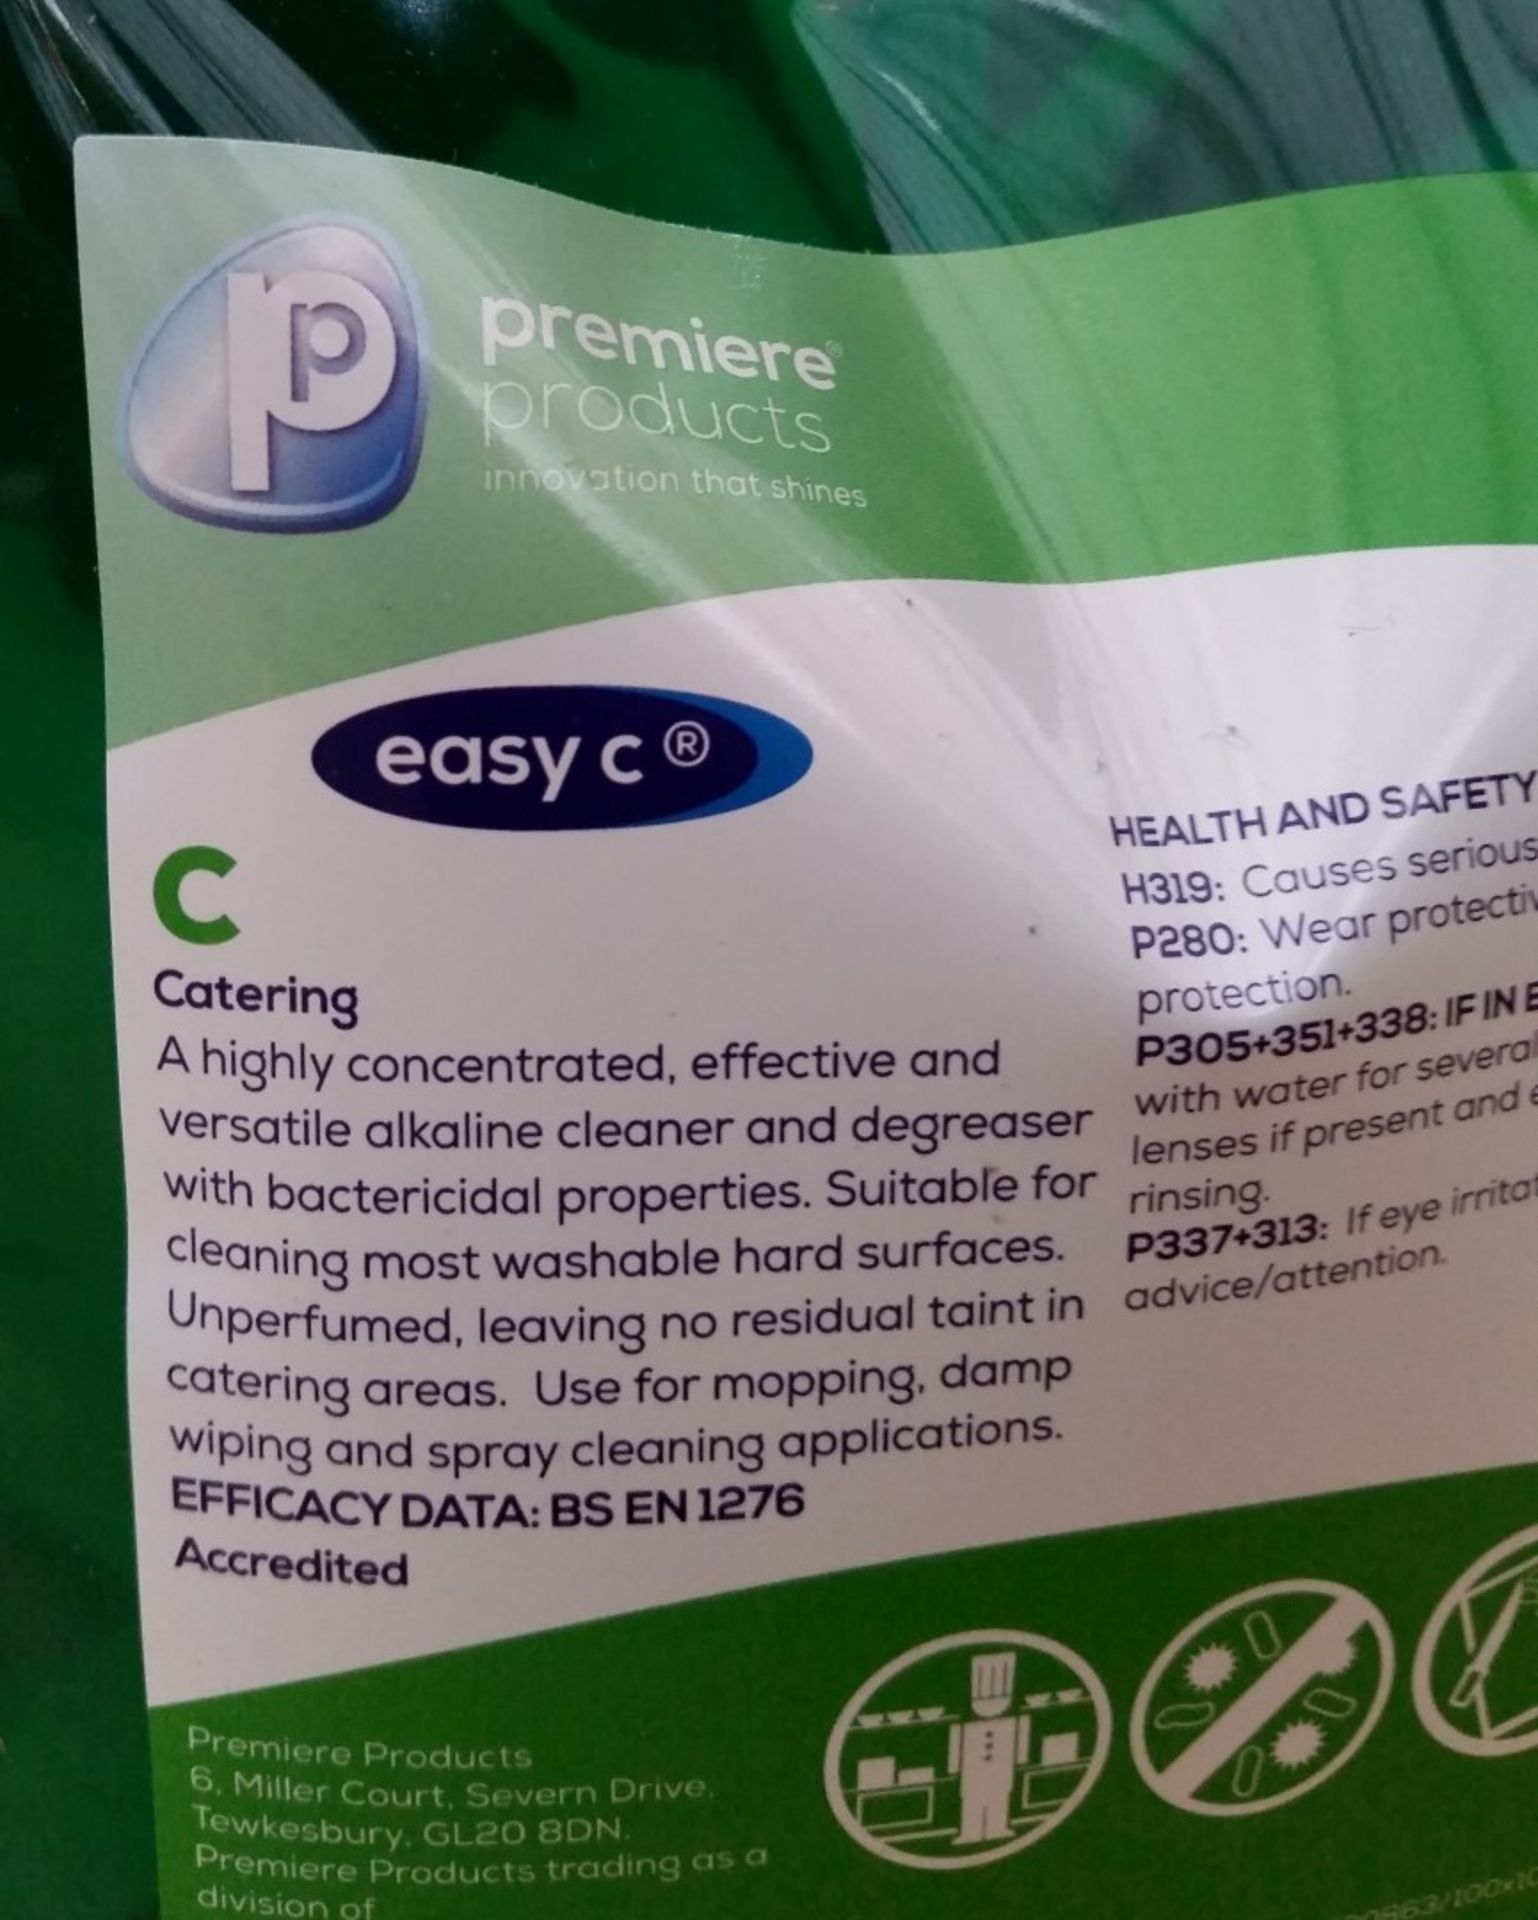 20 x Premiere 1.7 Litre Easy C (Catering) Alkaline Cleaner and Degreaser With Bacterial Properties - - Image 2 of 5